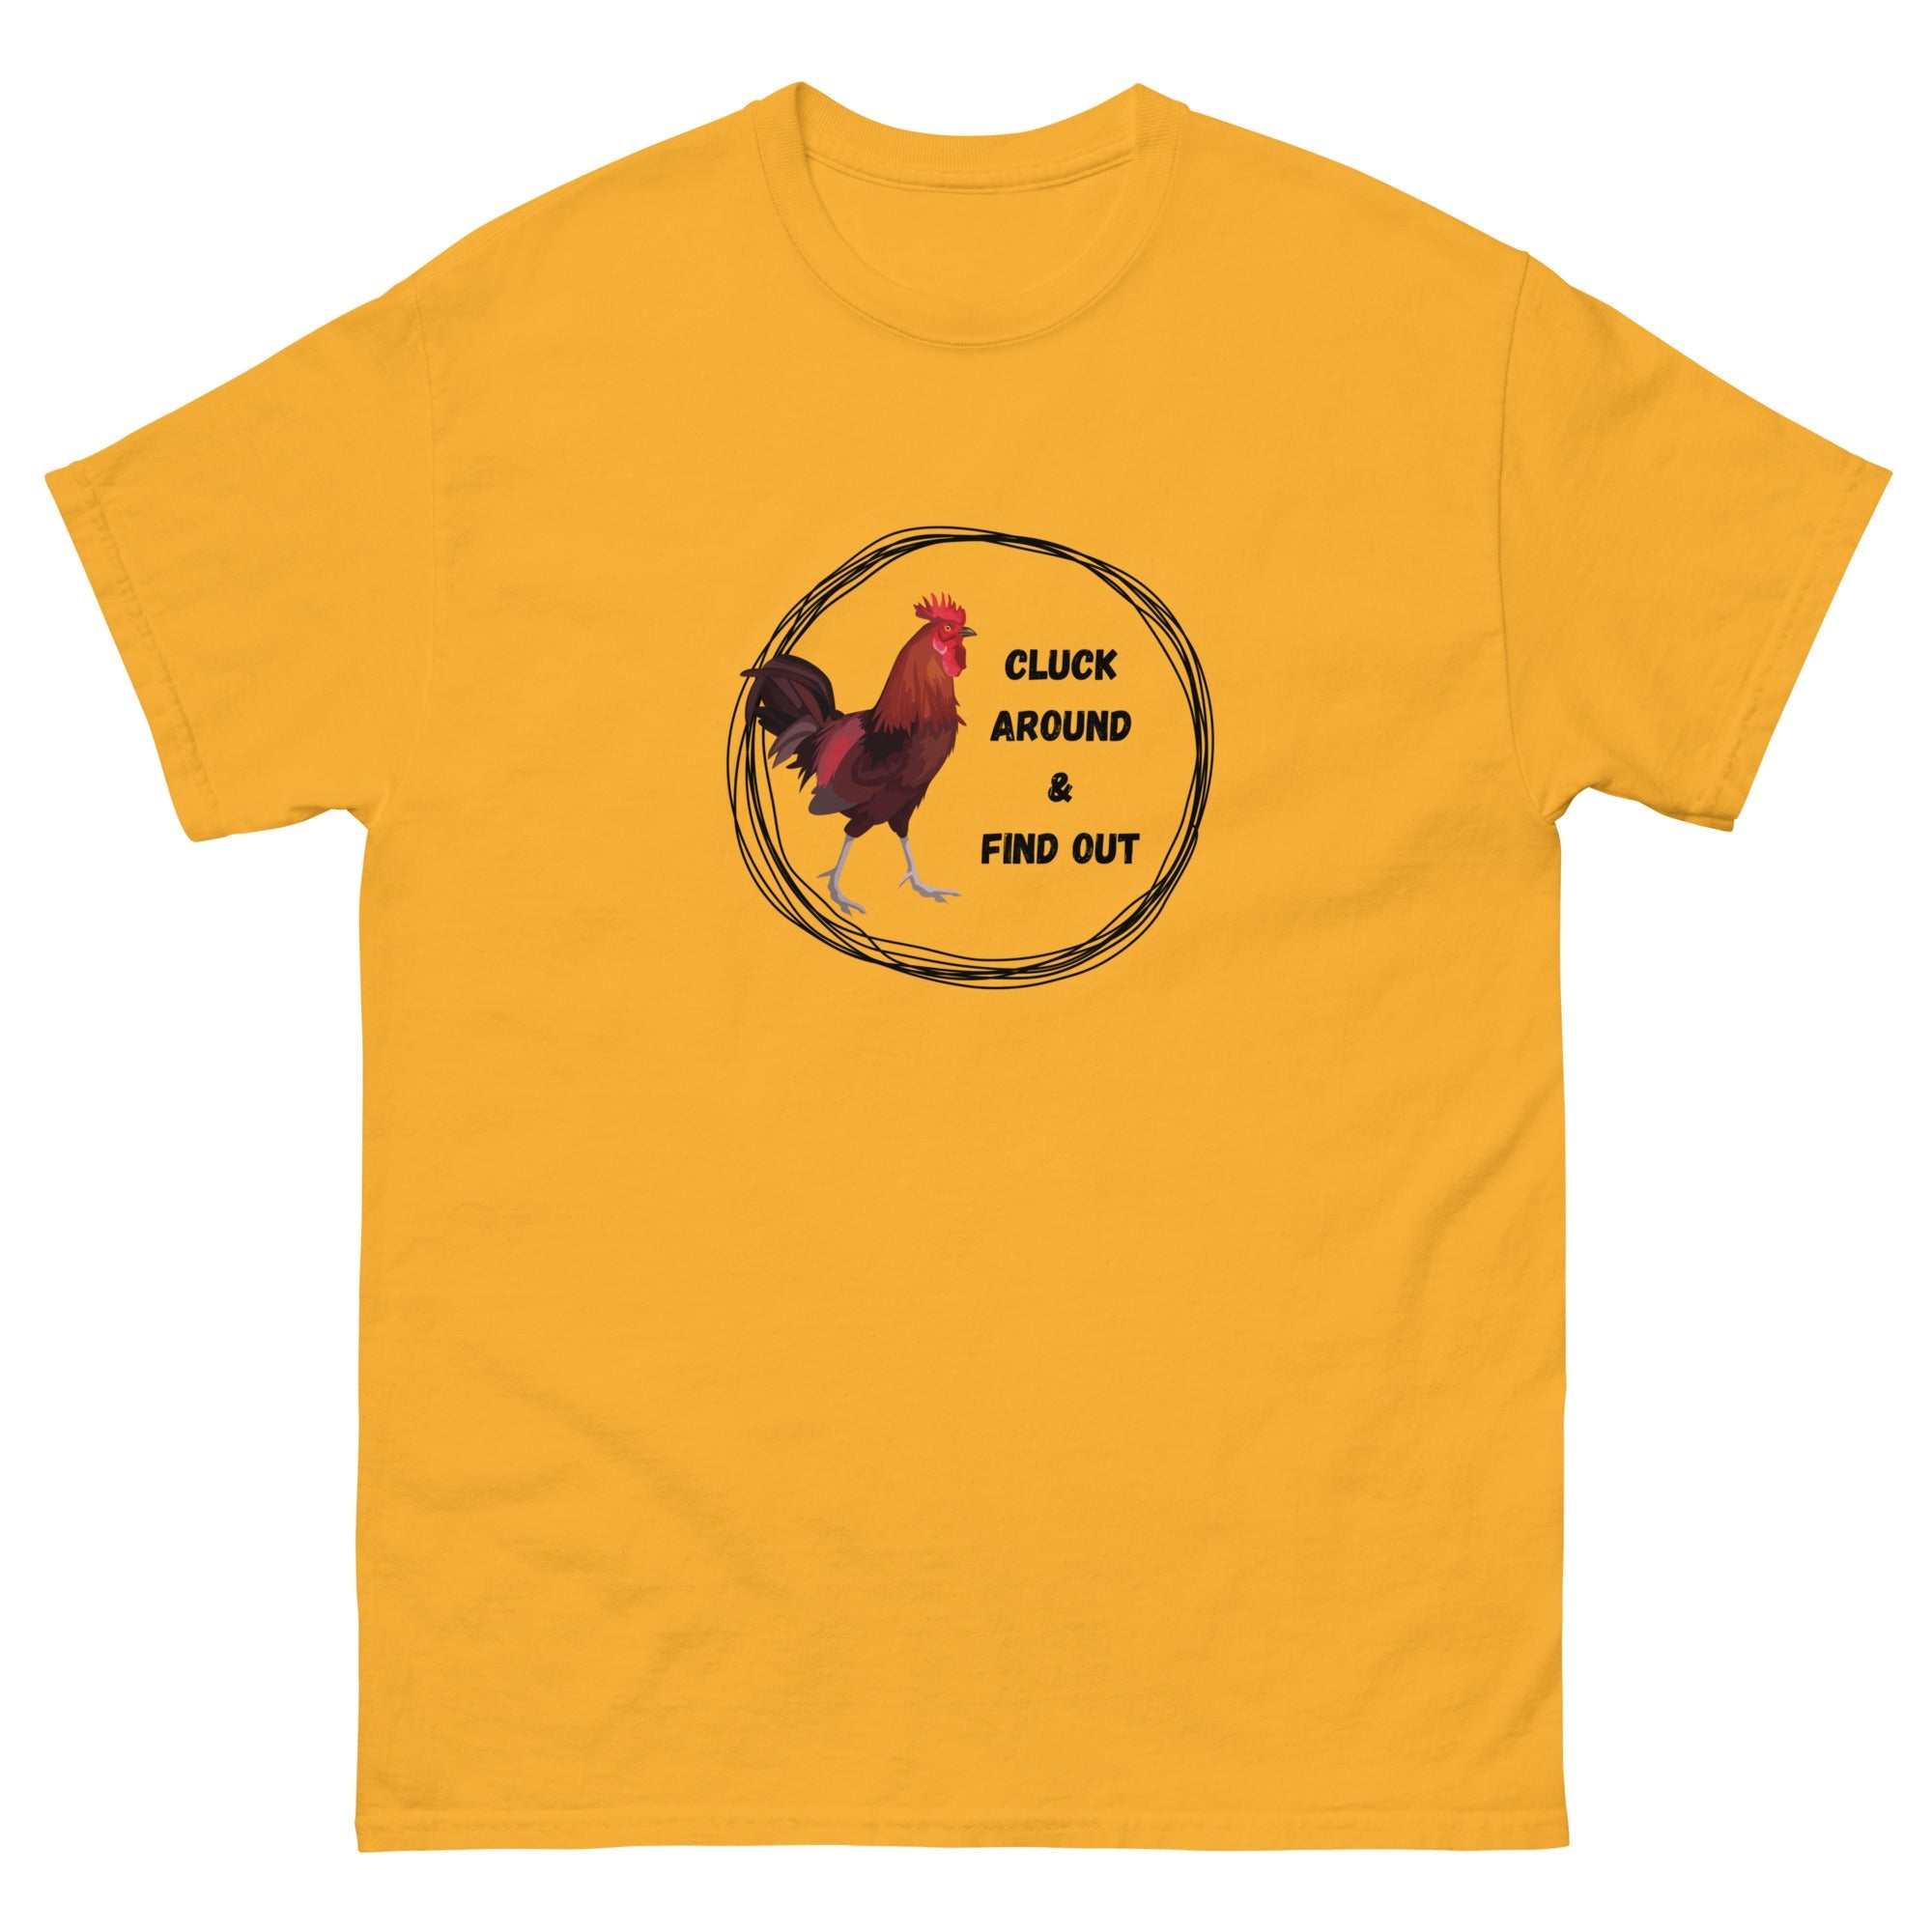 Cluck Around & Find Out Men's Classic Tee - Cluck It All Farms